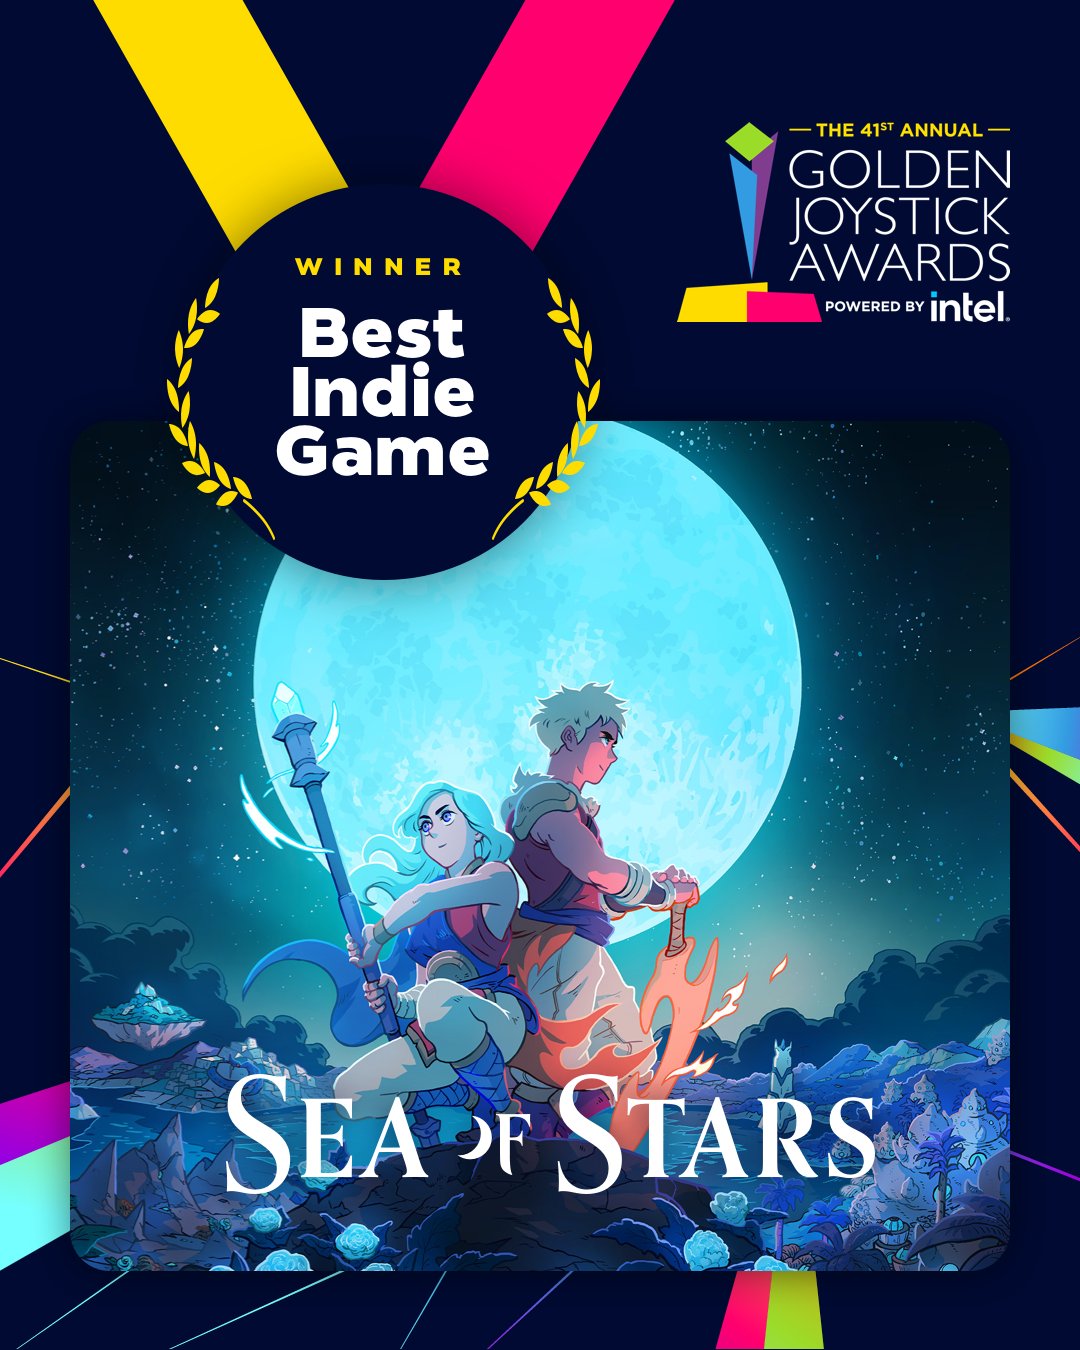 Sea of Stars launches next summer